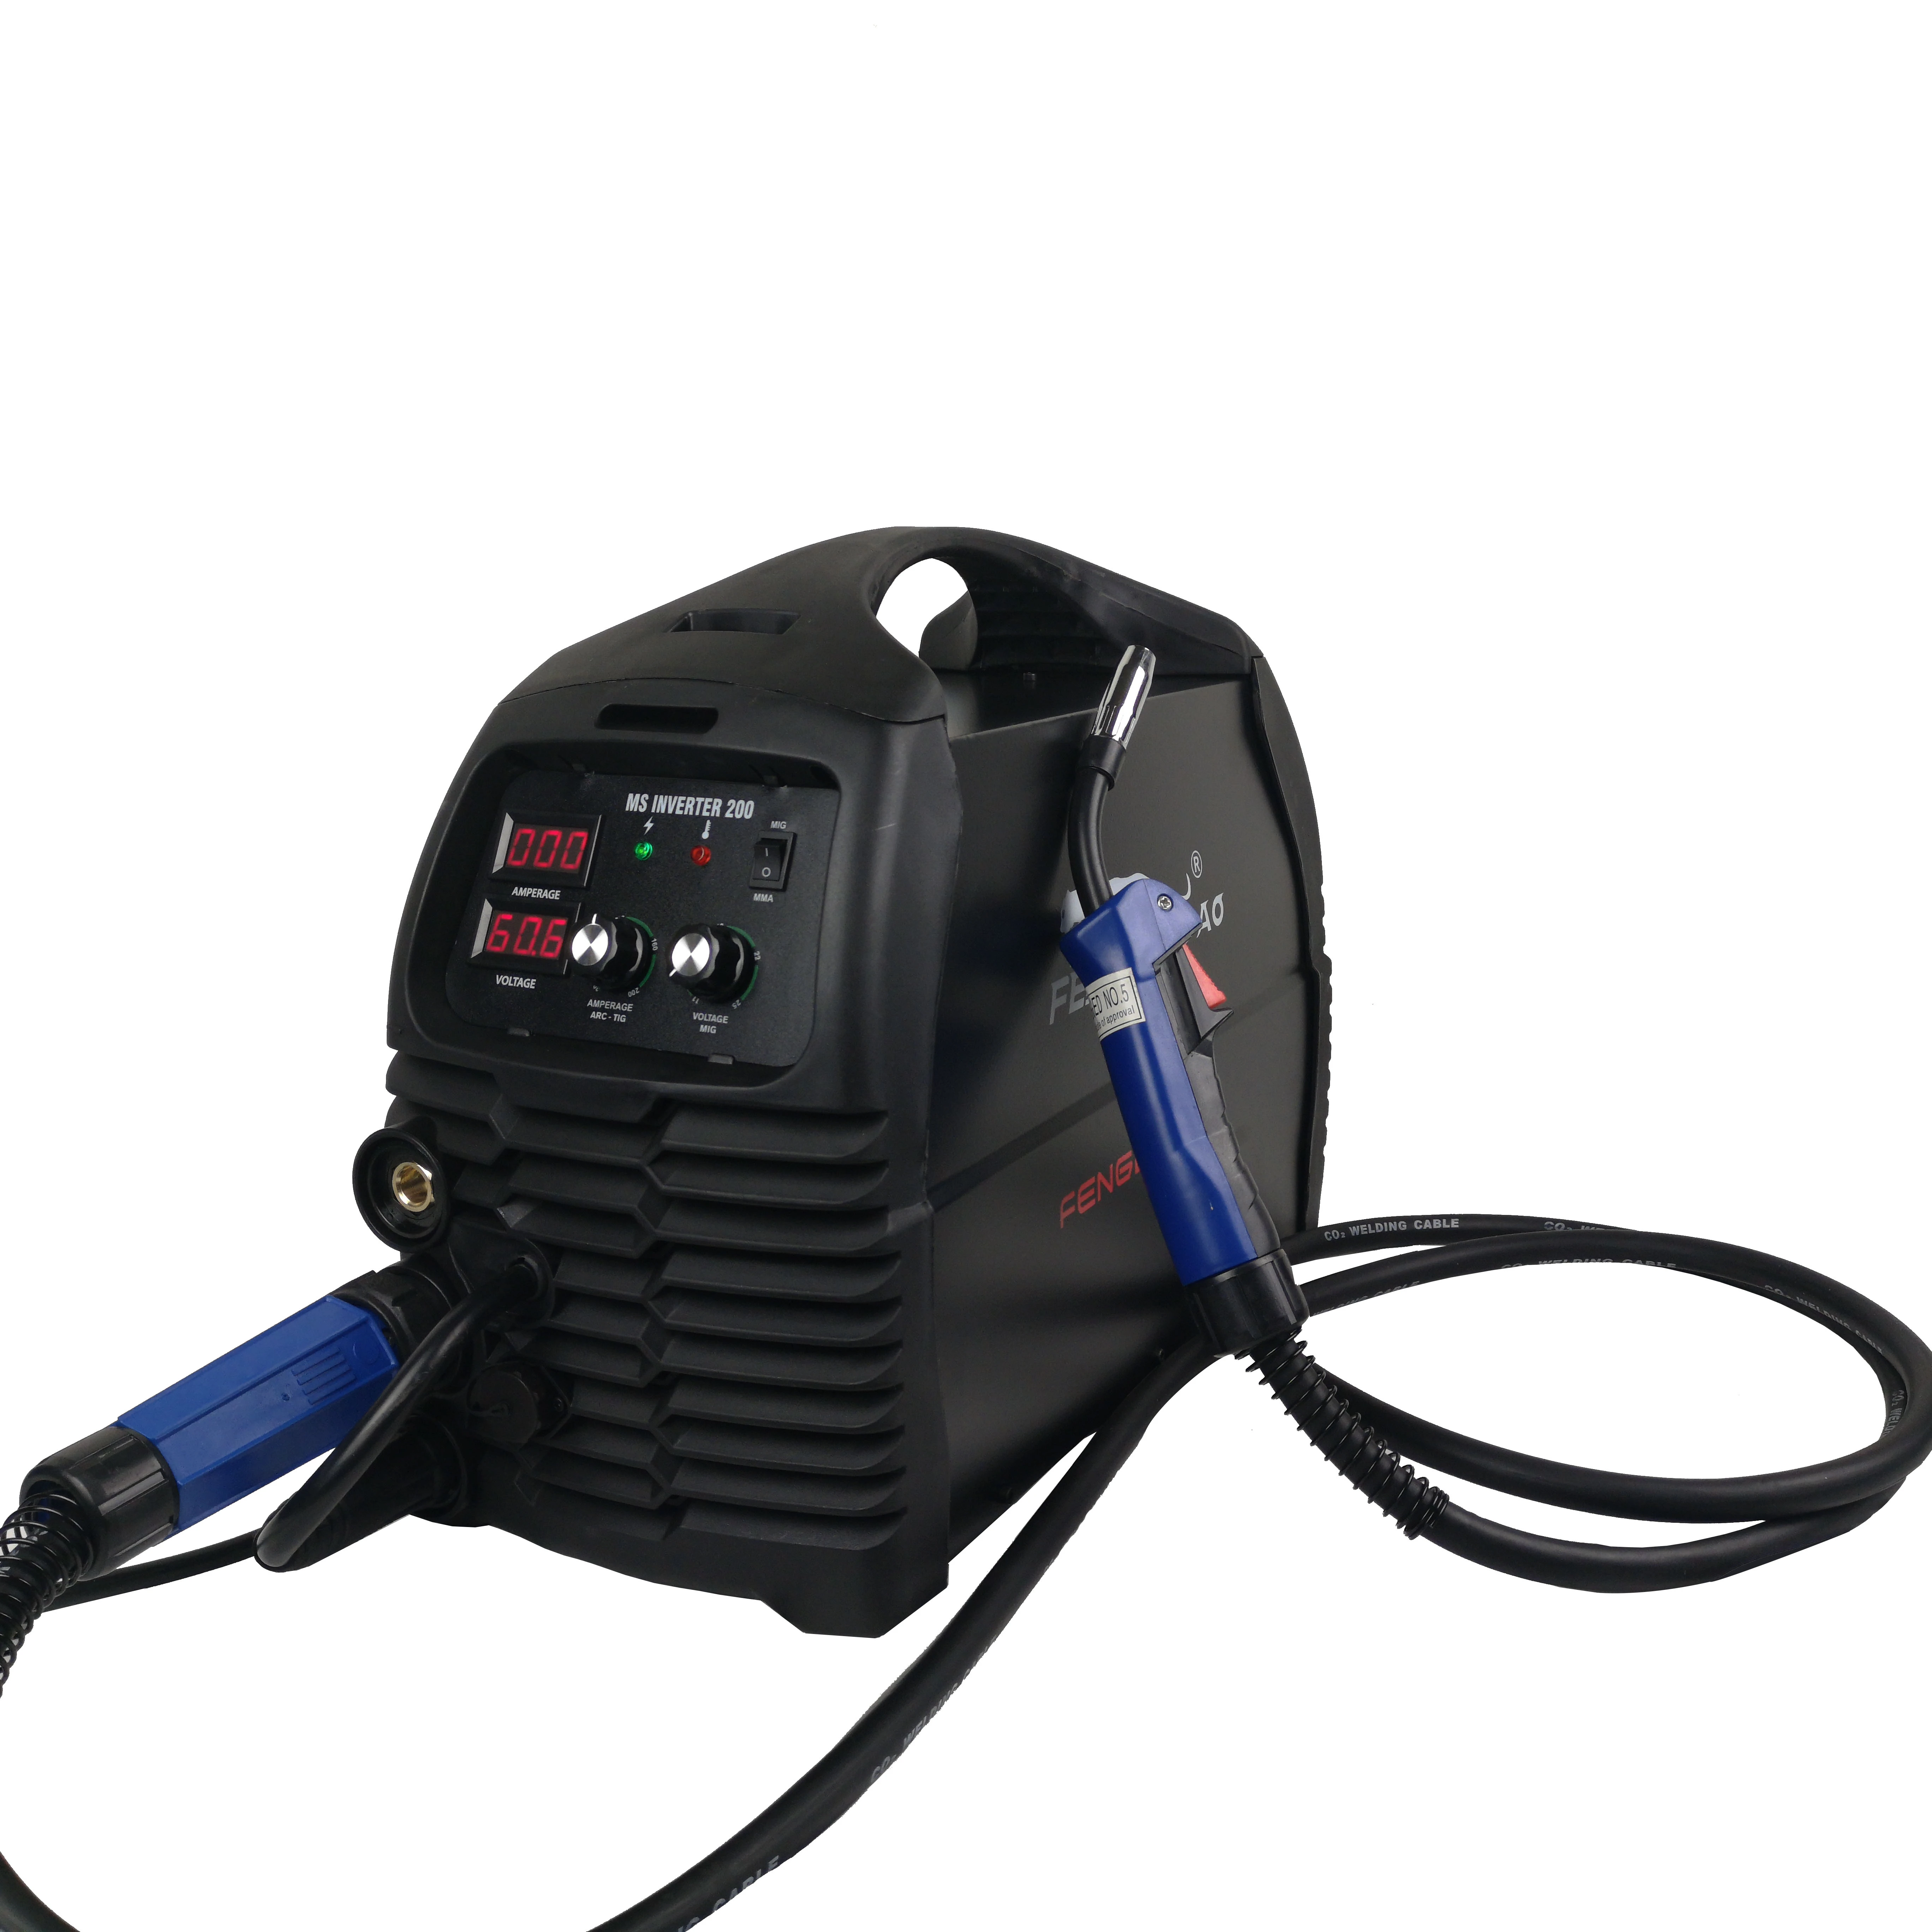 

DECAPOWER IGBT Inverter MMA MIG Welders 180 amp MAG 3 in 1 No gas CO2 MIG Welding Machine Free Shipping to Russia